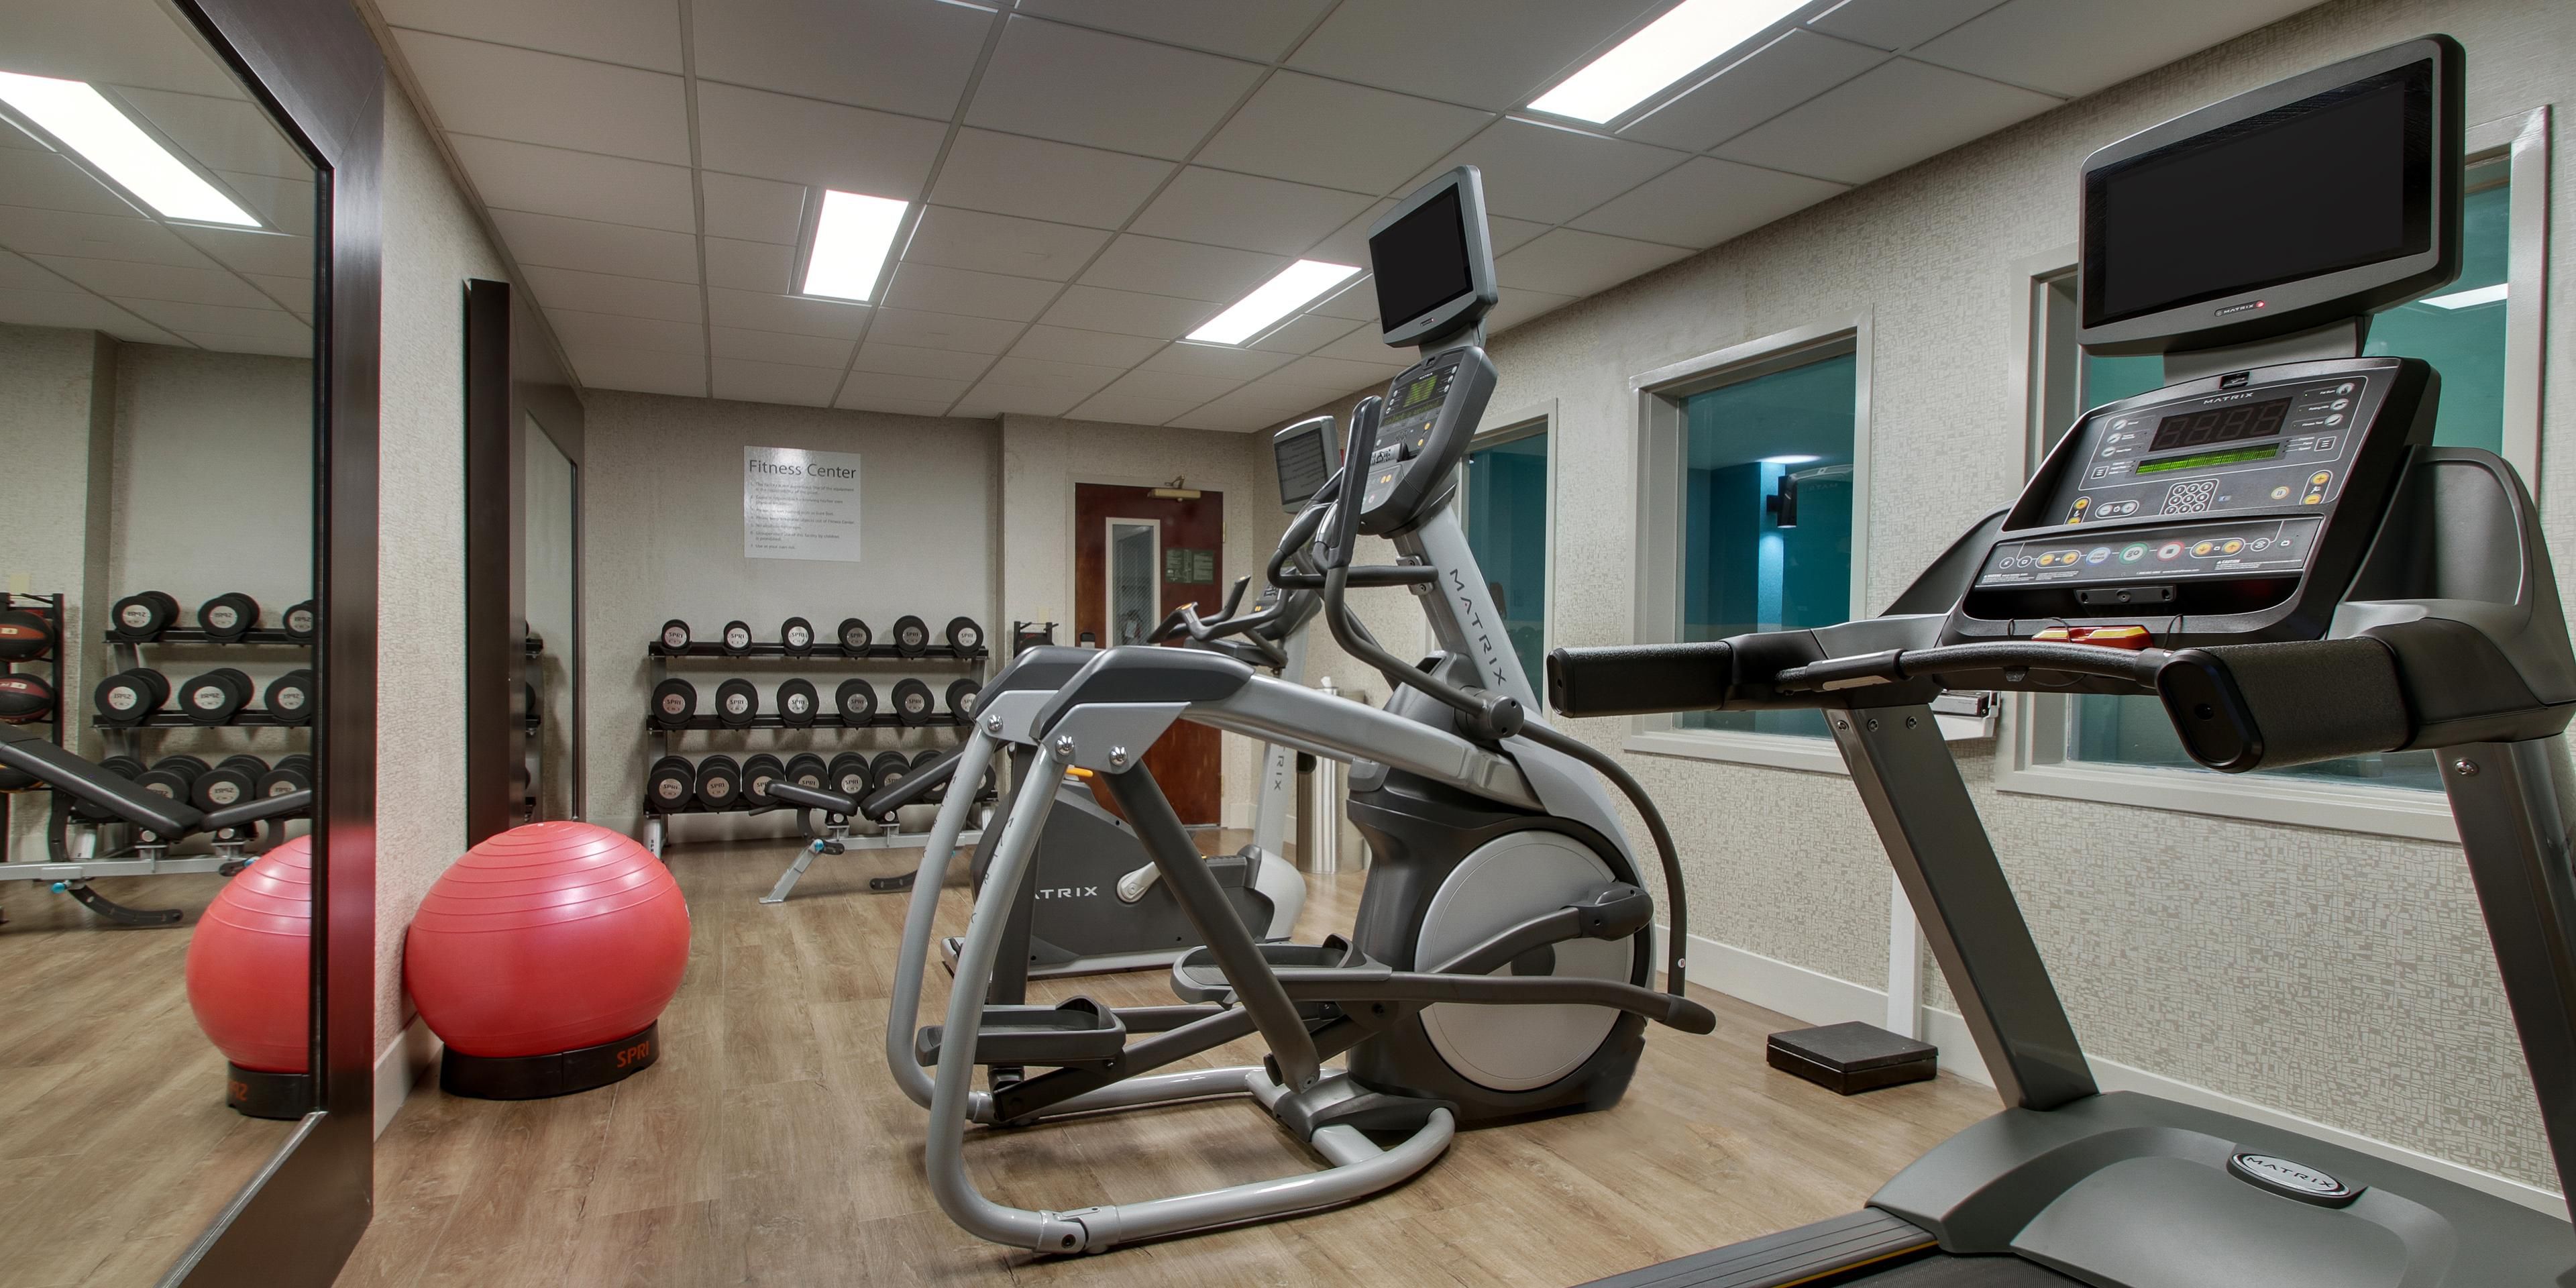 At Holiday Inn Express Horse Cave our fitness center is the perfect place to help you stay healthy and feeling good. We have free weights and cardio equipment to get your blood pumping after a day of traveling.